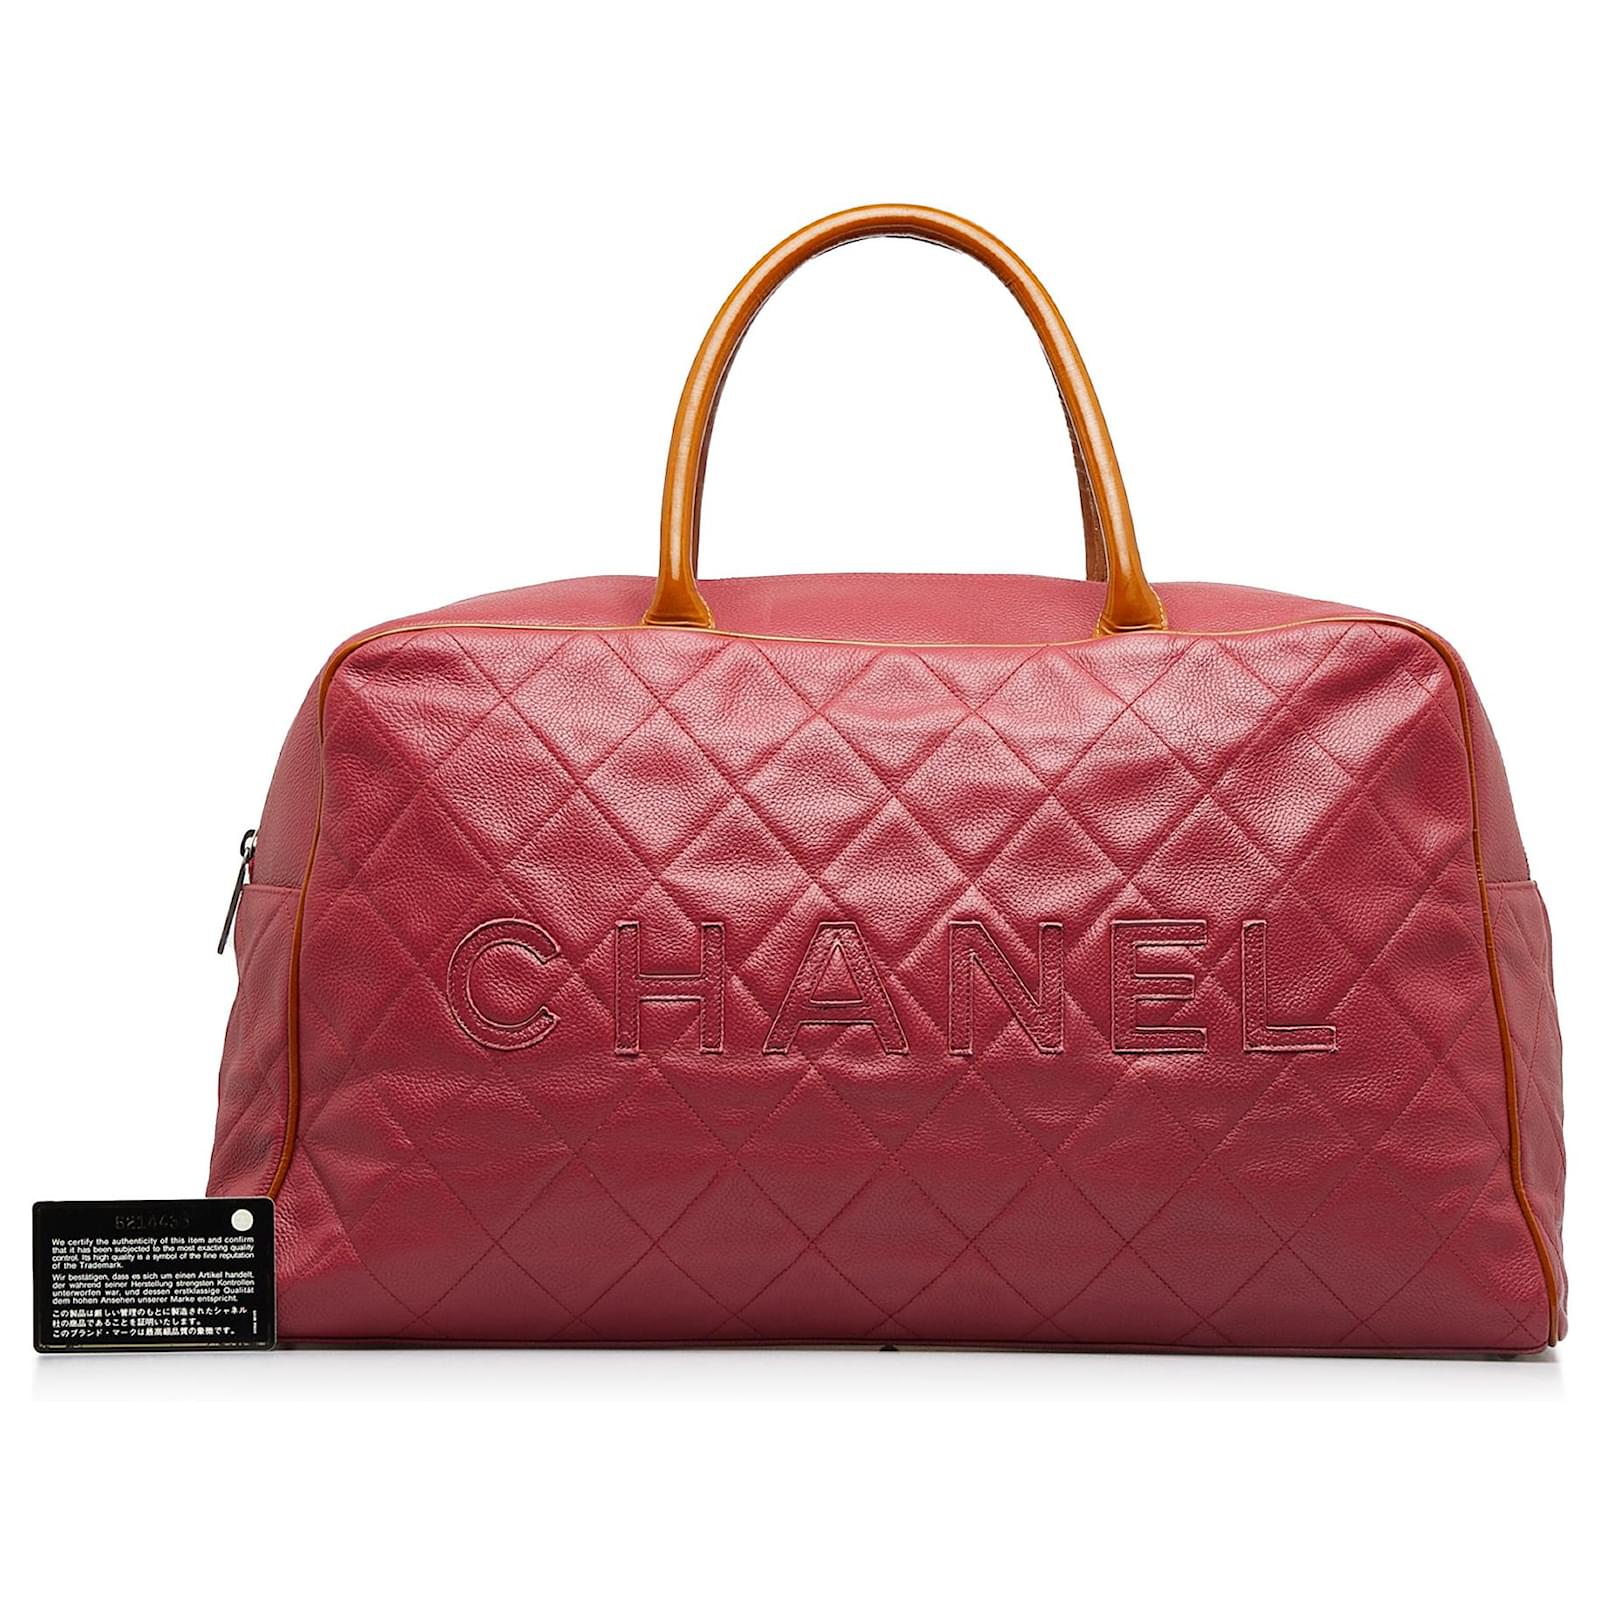 Chanel Red Quilted Caviar Grand Logo Duffle Bag Light brown